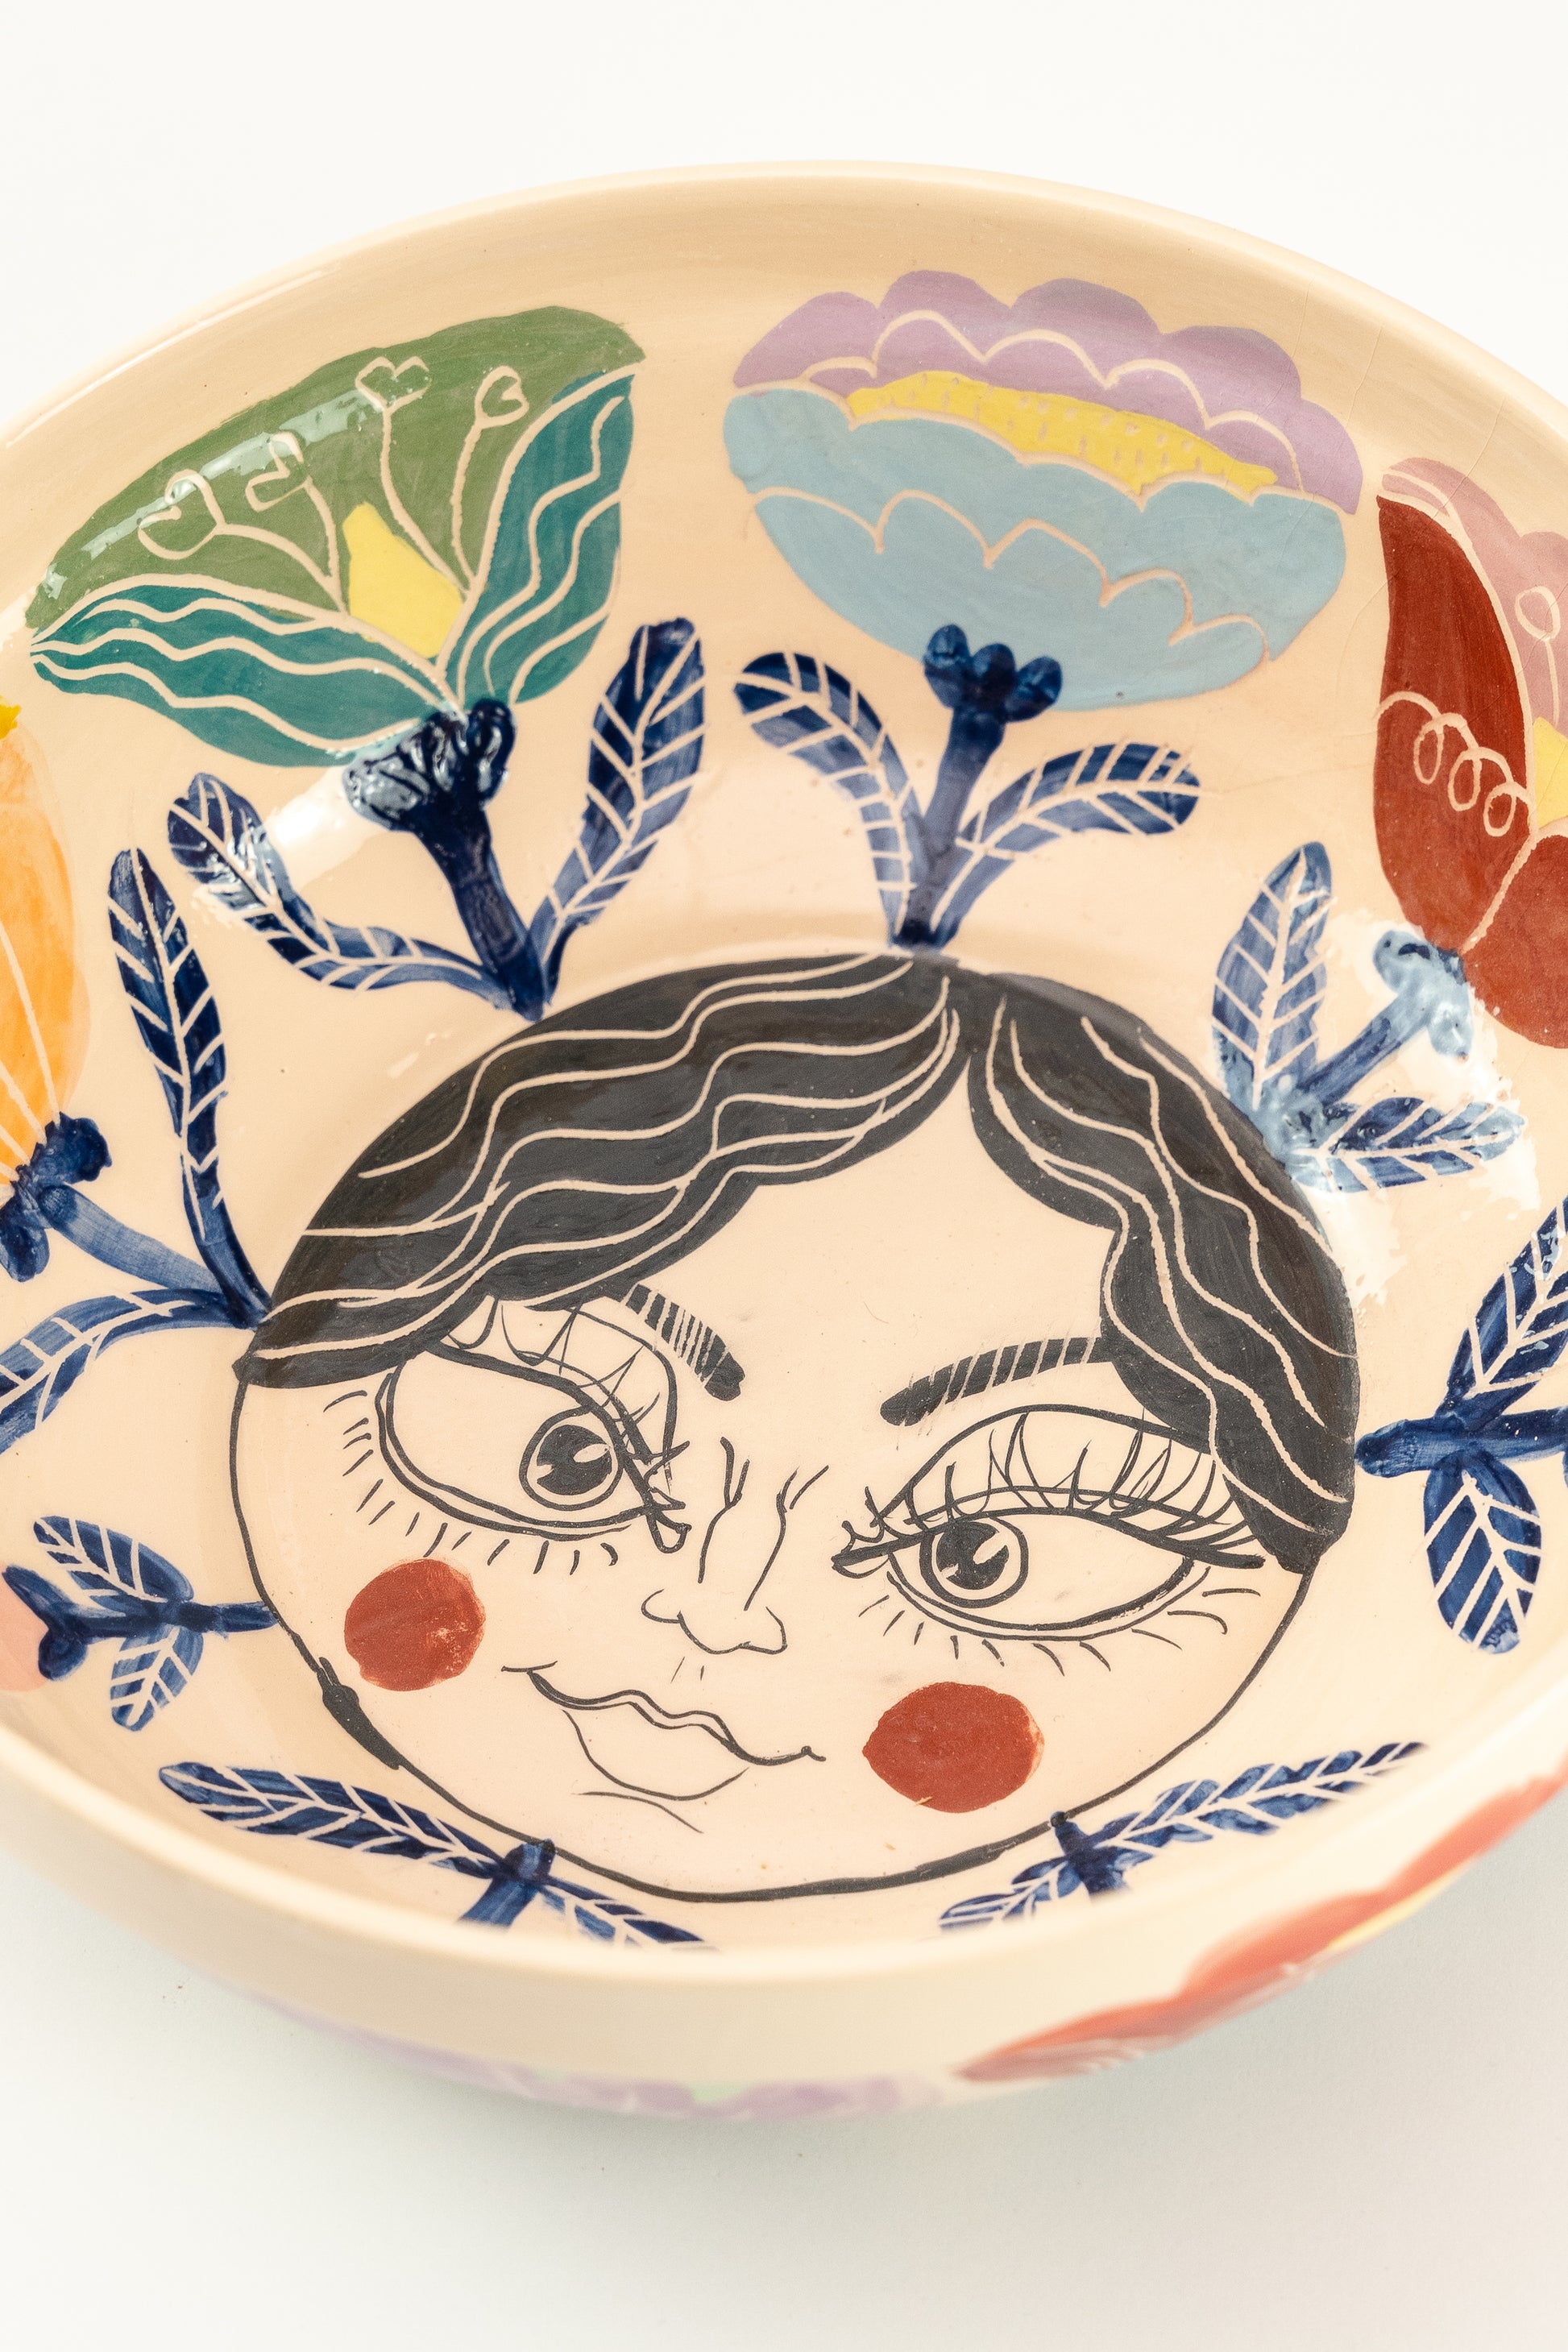 Handmade ceramic serving bowls fpor salads, with colorful flower details and a kind face design on the bottom of the bowl